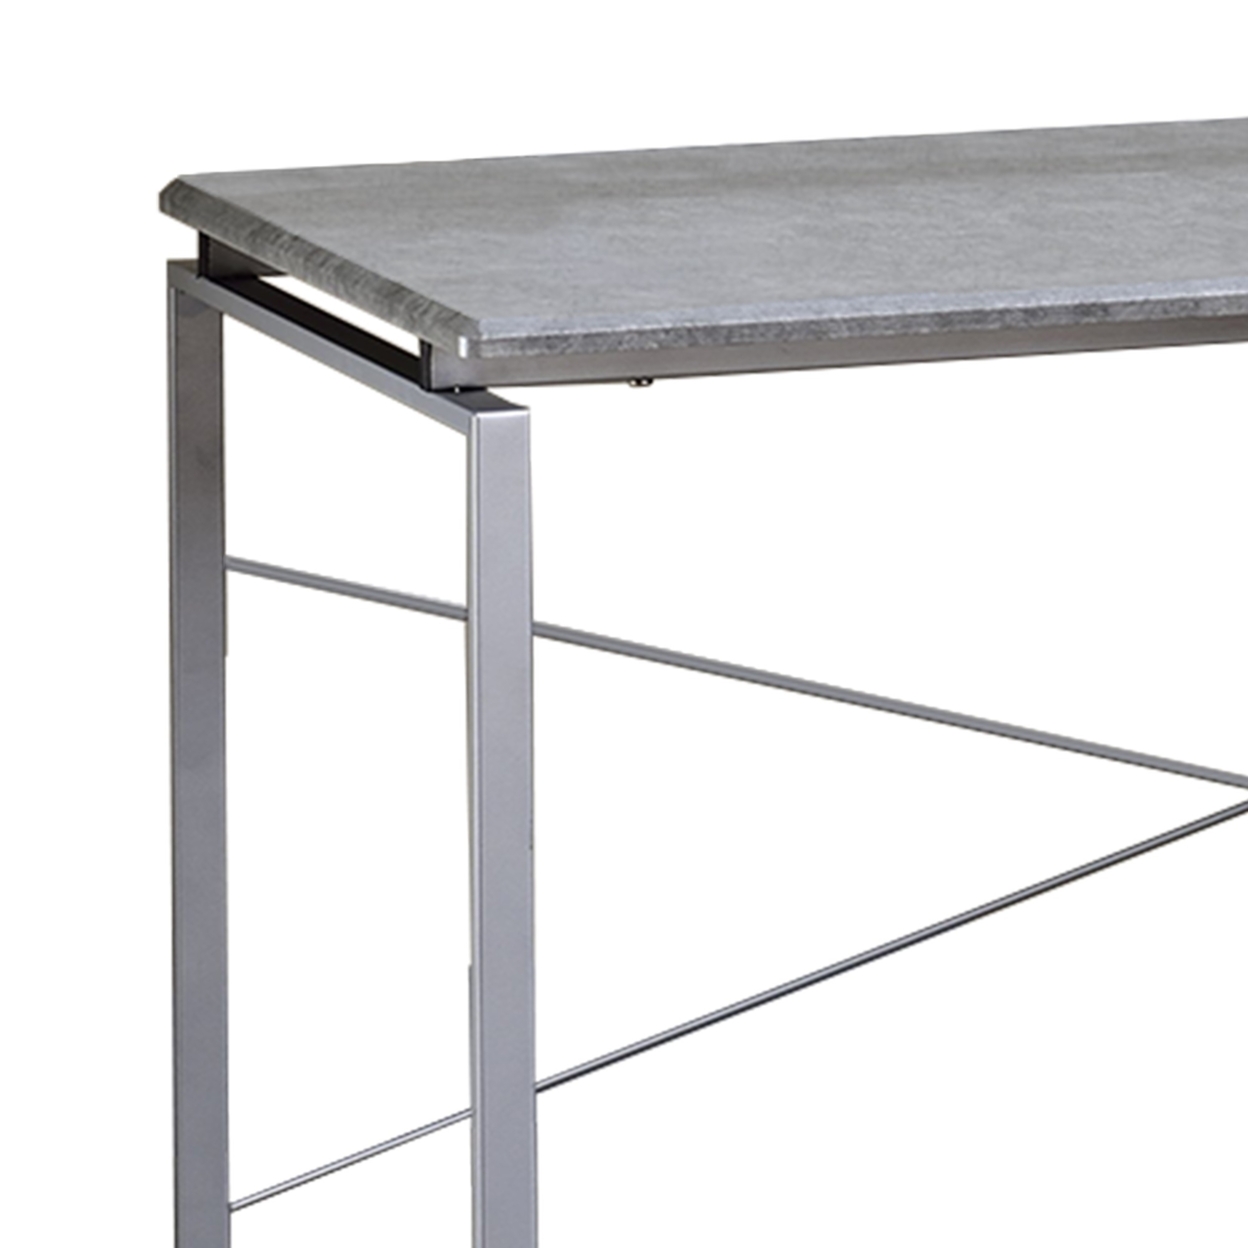 Sled Base Rectangular Table With X Shape Back And Wood Top,Gray And Silver